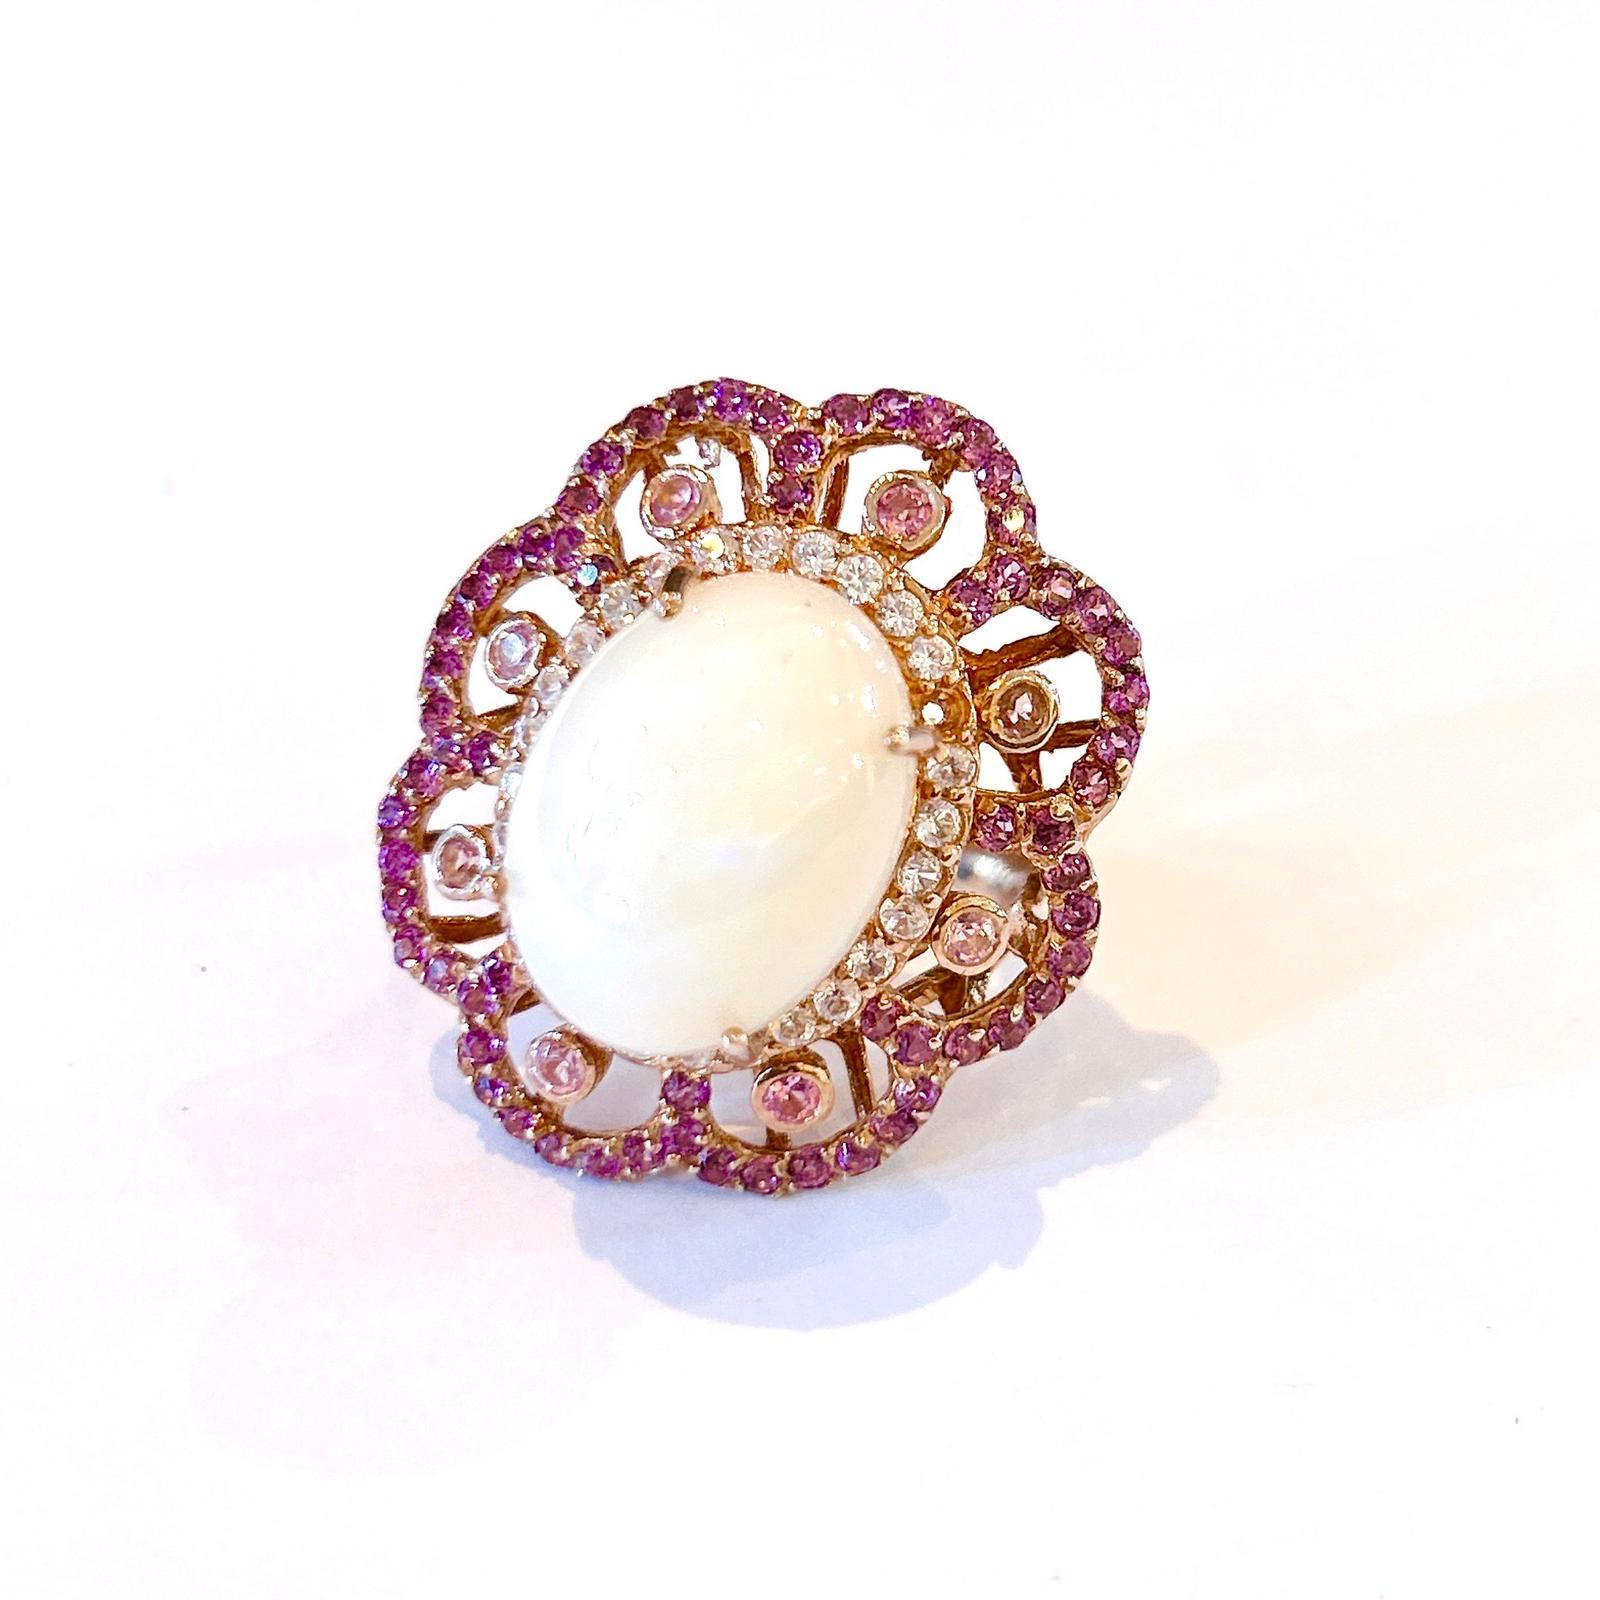 Bochic “Capri” Pink Sapphire & Opal Cocktail Ring Set in 18k Gold & Silver In New Condition For Sale In New York, NY